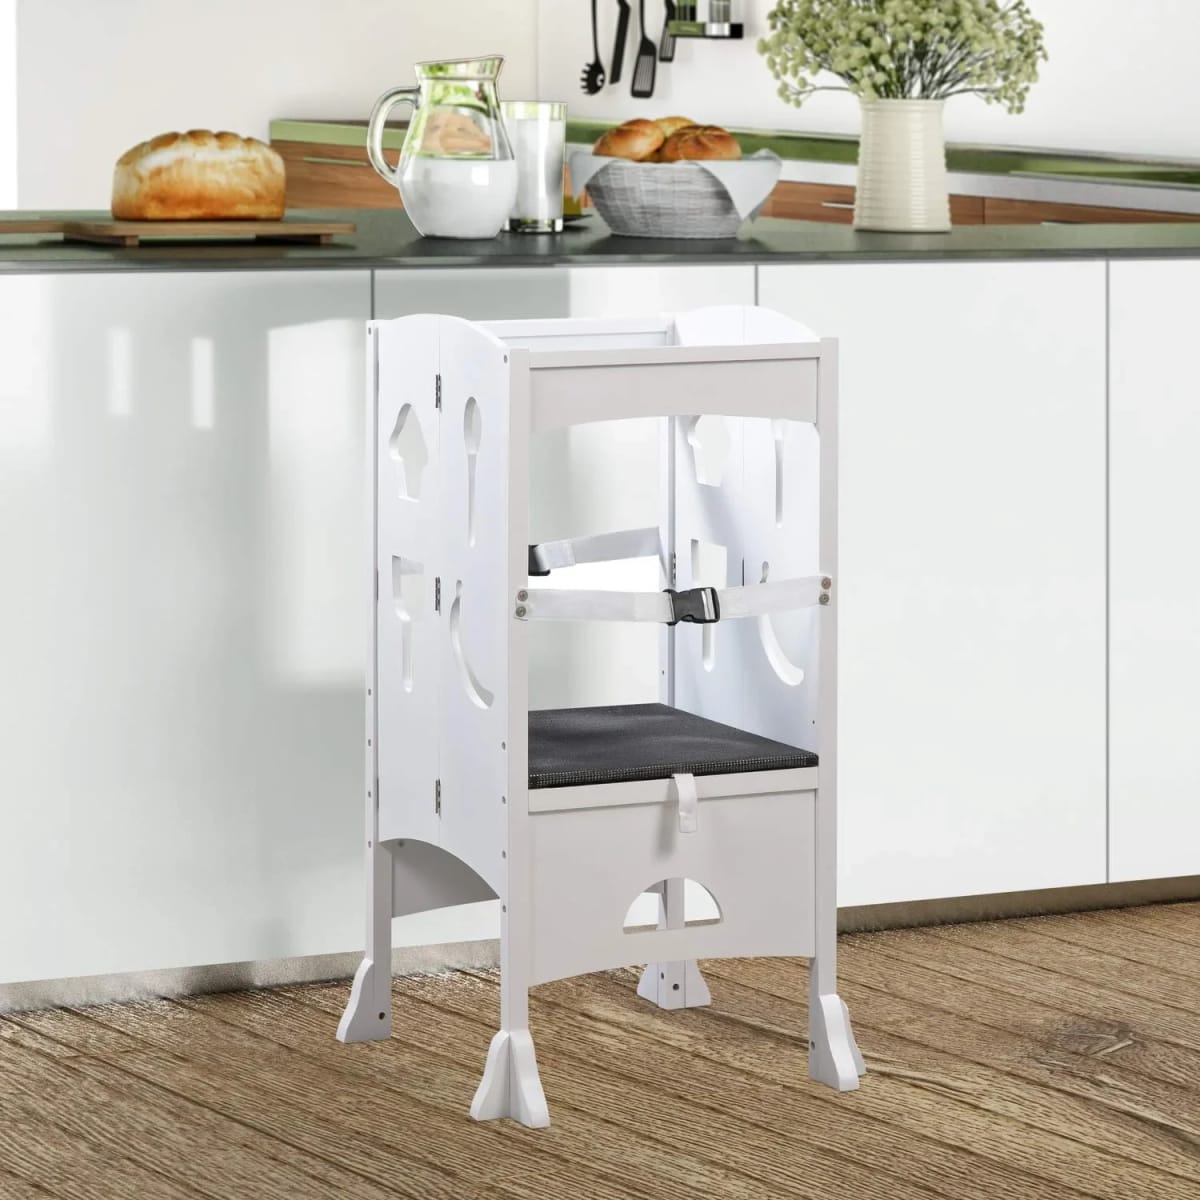 Kitchen Step Stool for Toddlers with Safety Rail